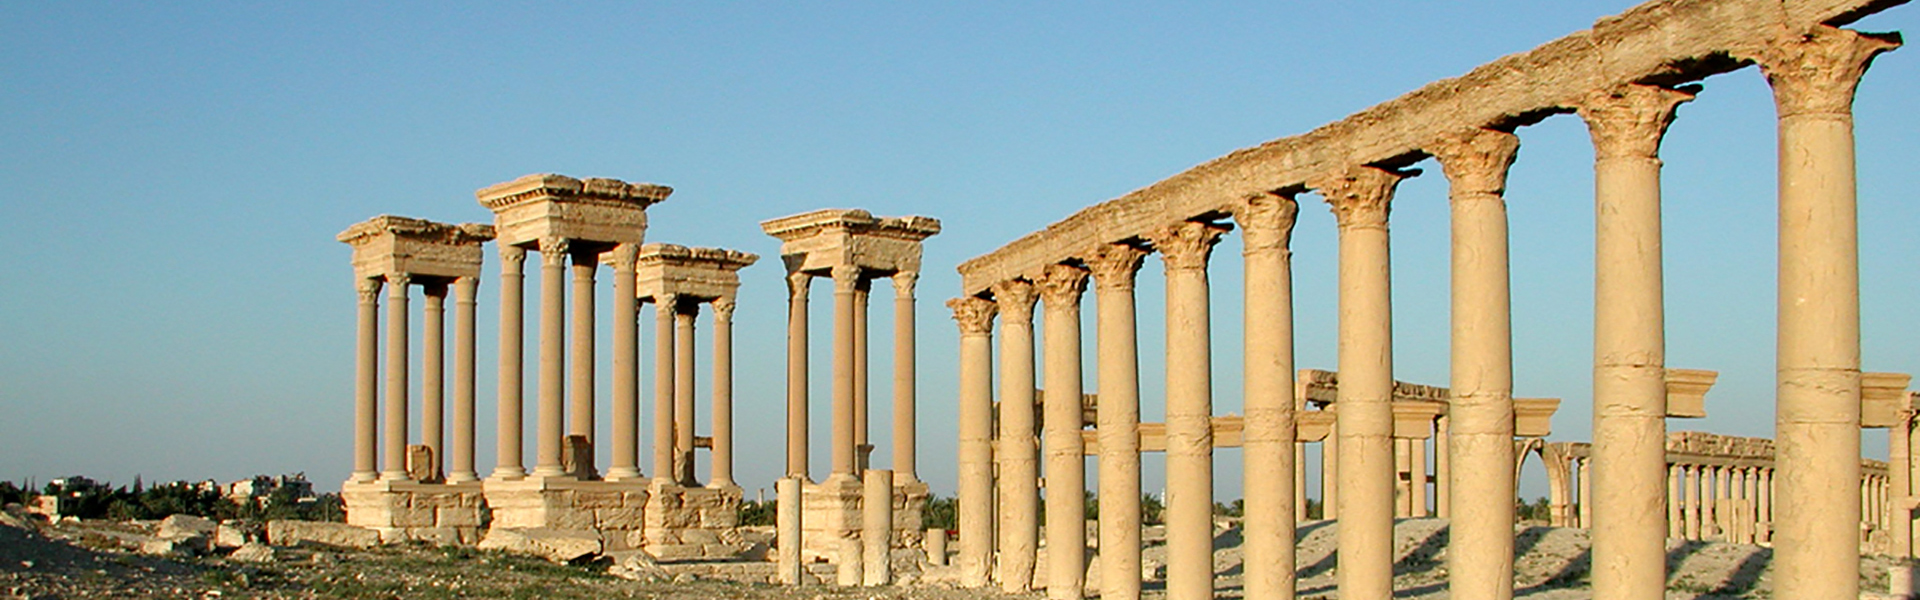 pid000571_Palmyra_Syria_2001_08_Great-Colonnade-Leading-to-Tetrapylon-Banner-Page-1920x600